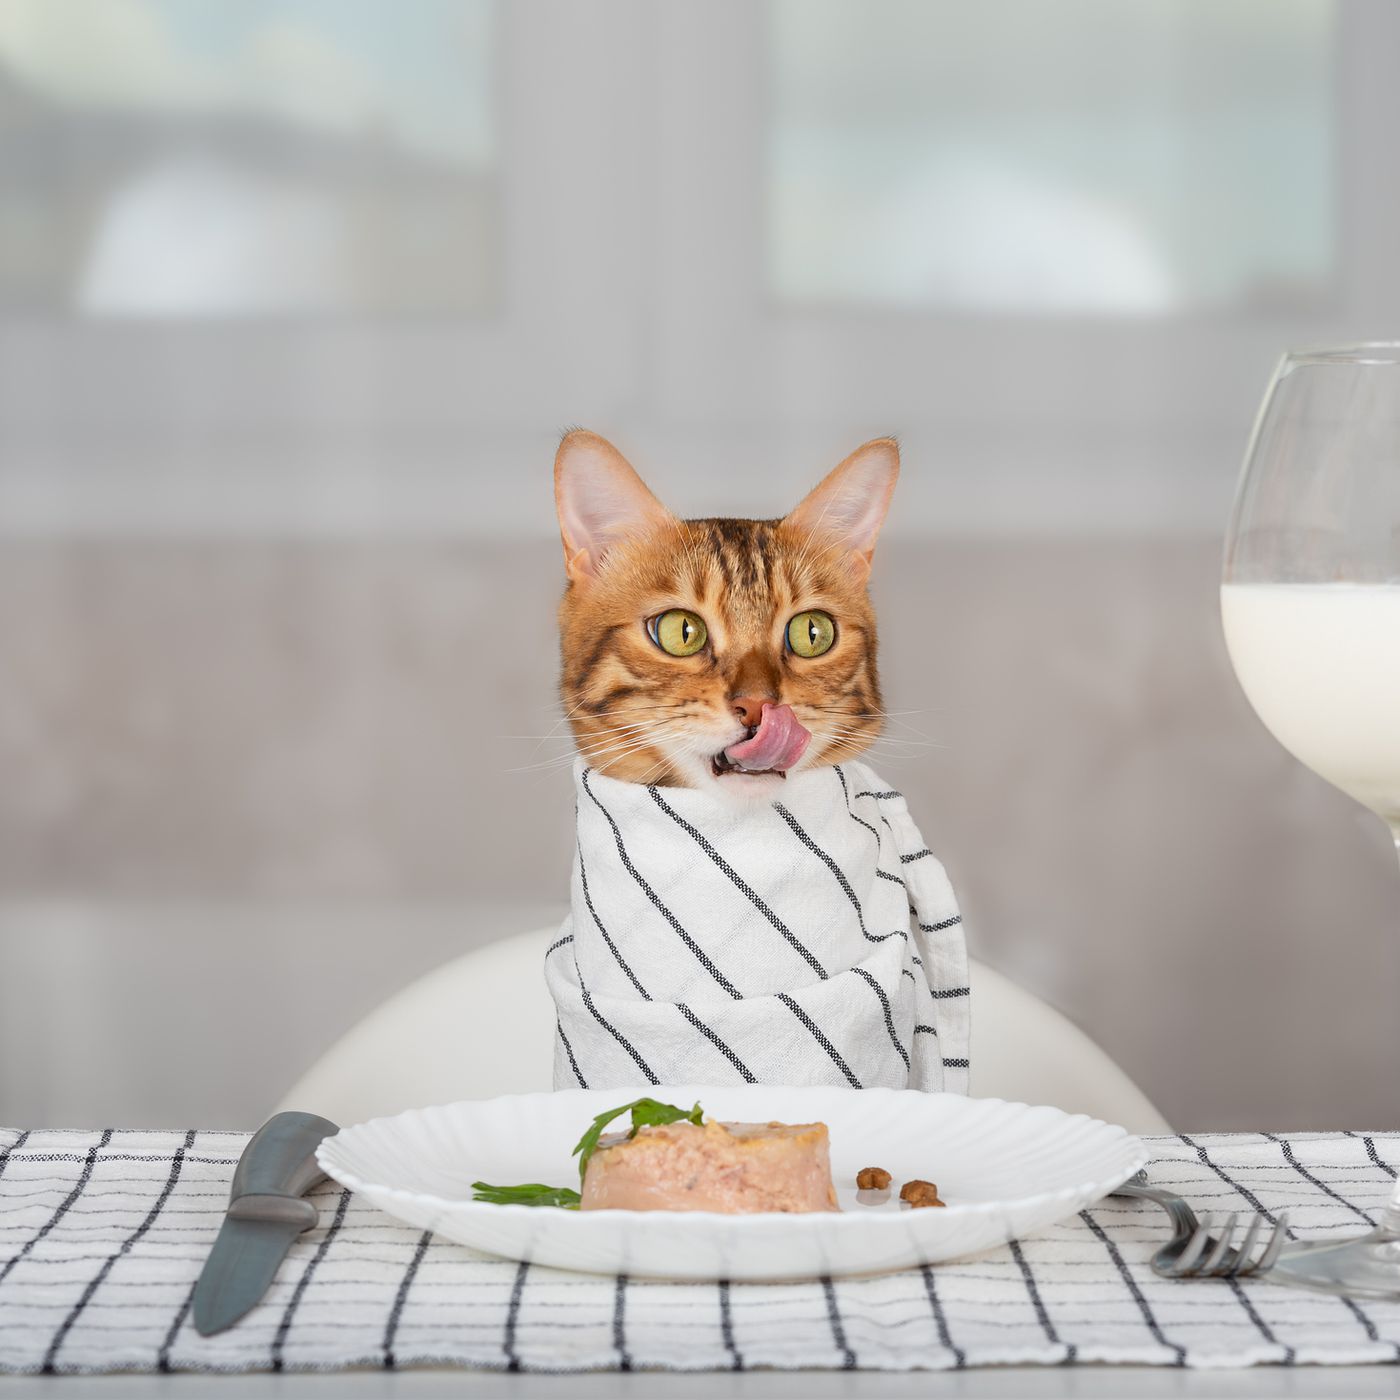 Fancy Feast Is Hosting A Pop-up Restaurant For Humans, With A Menu Inspired By Cat Food photo